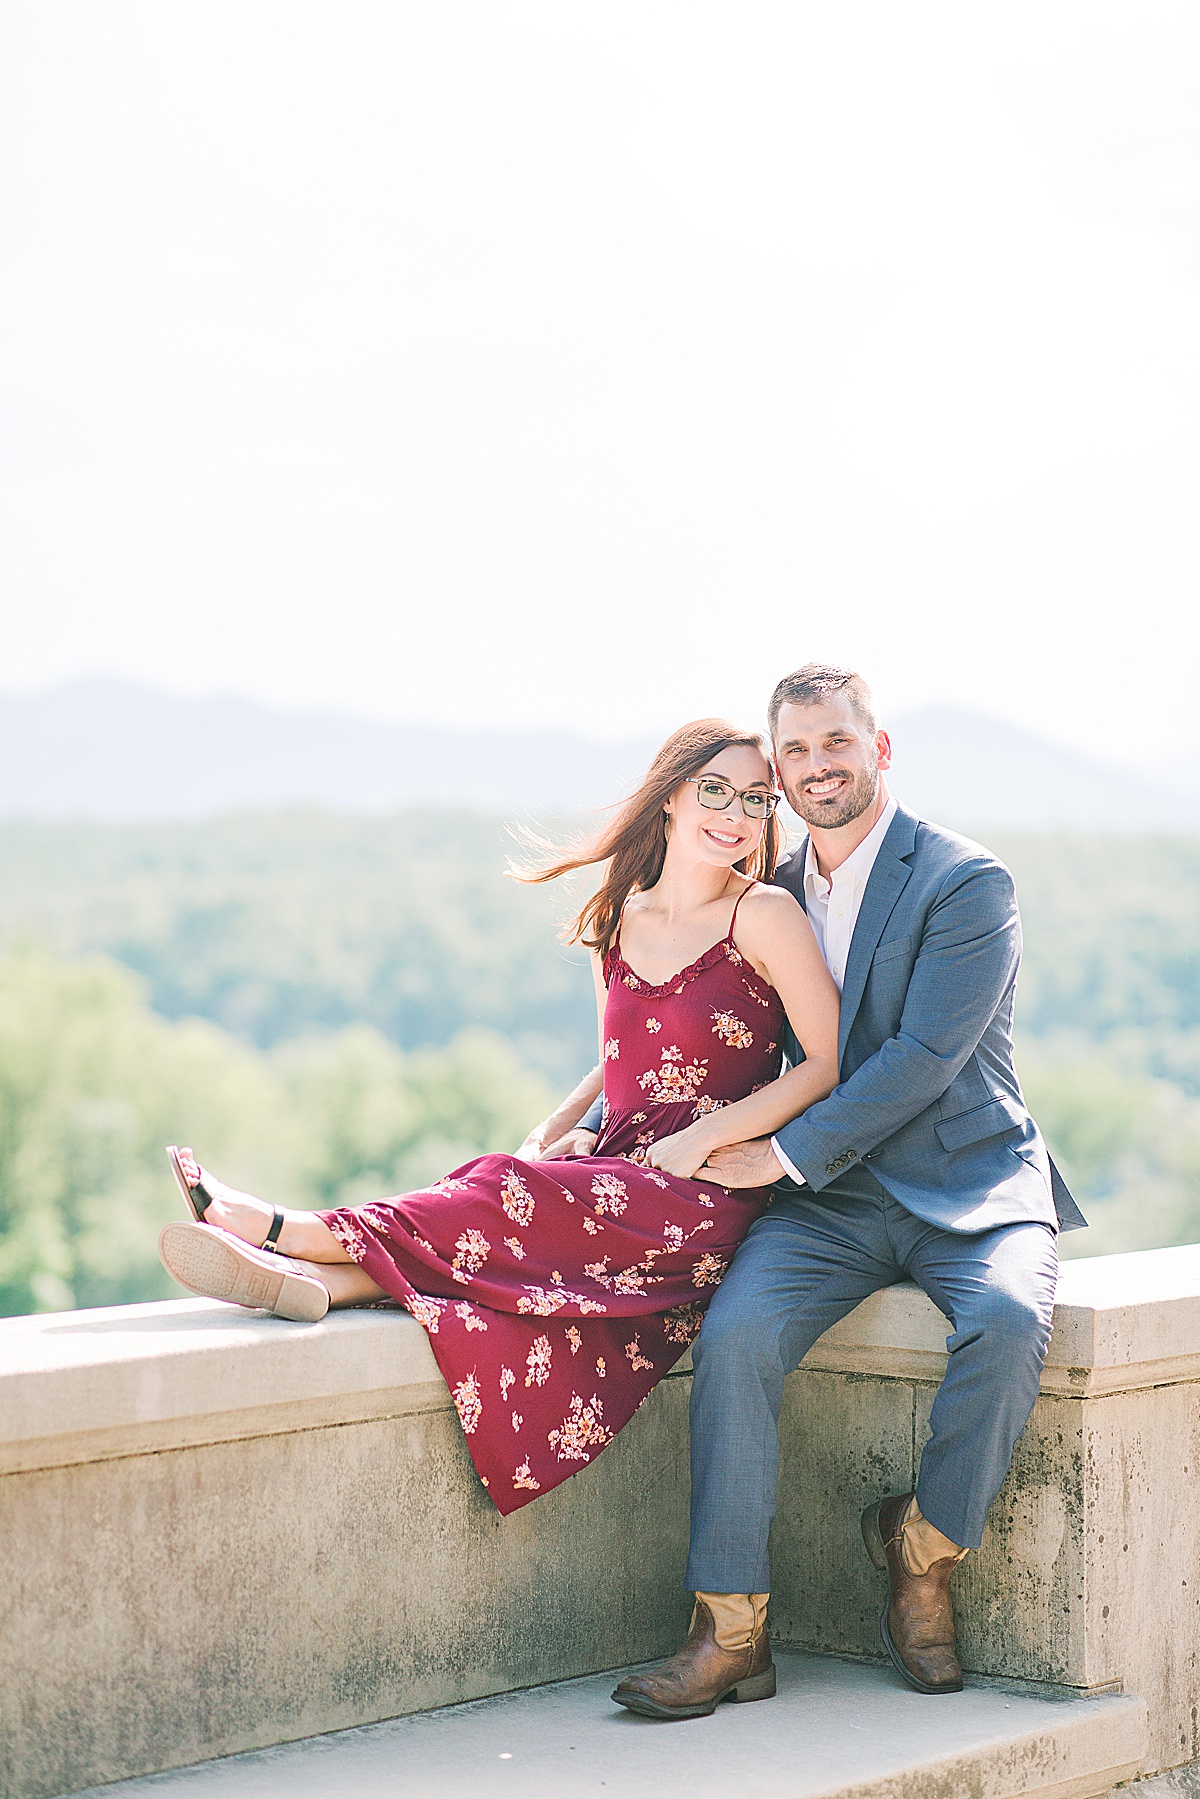 Biltmore Estate Anniversary Session Couple sitting on wall with mountains in the background Photo